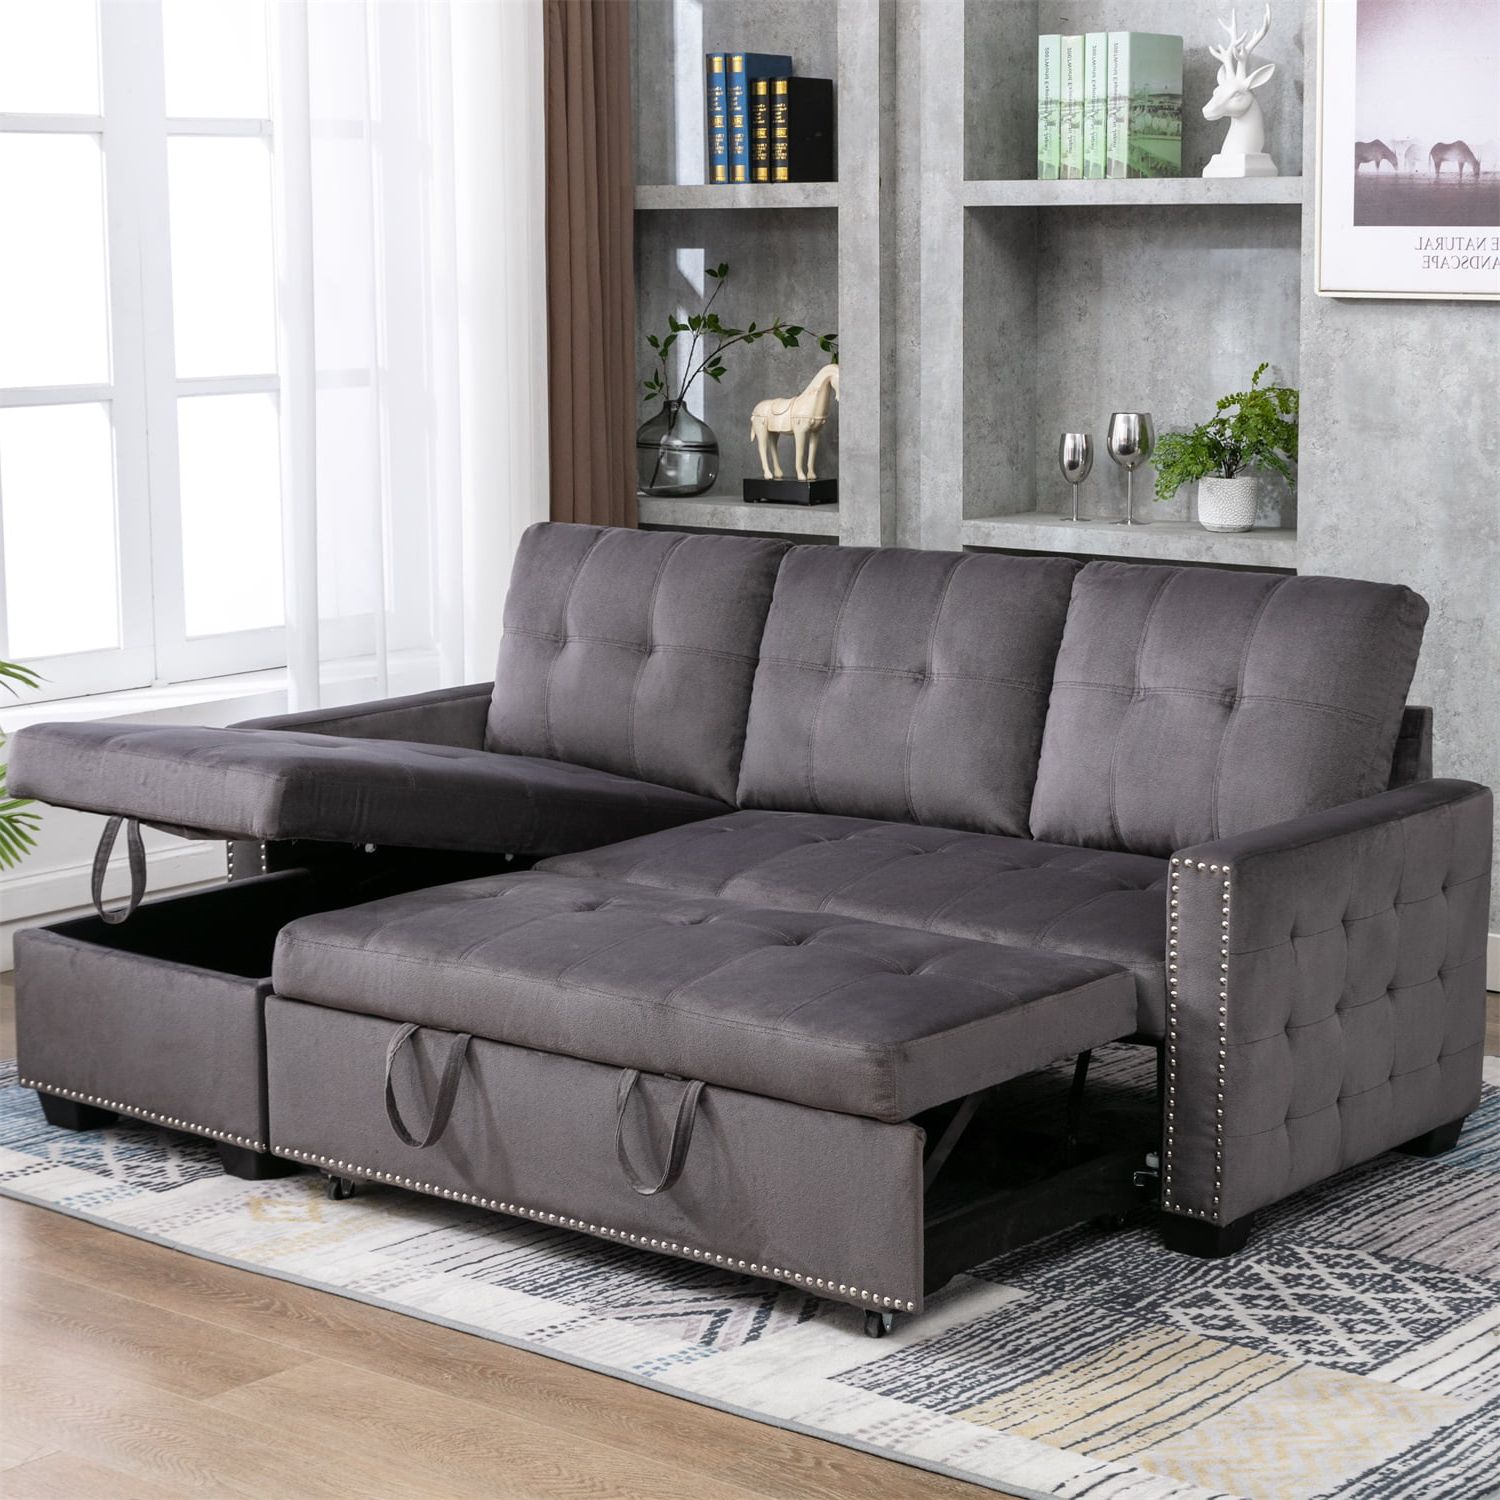 Resenkos Velvet Fabric 77" Pull Out Sleeper Sofa Bed With Storage Chaise, 3 Seat  L Shaped Sectional Sofa Couch For Living Room/small Space, Dark Grey –  Walmart Inside Chaise 3 Seat L Shaped Sleeper Sofas (Gallery 1 of 20)